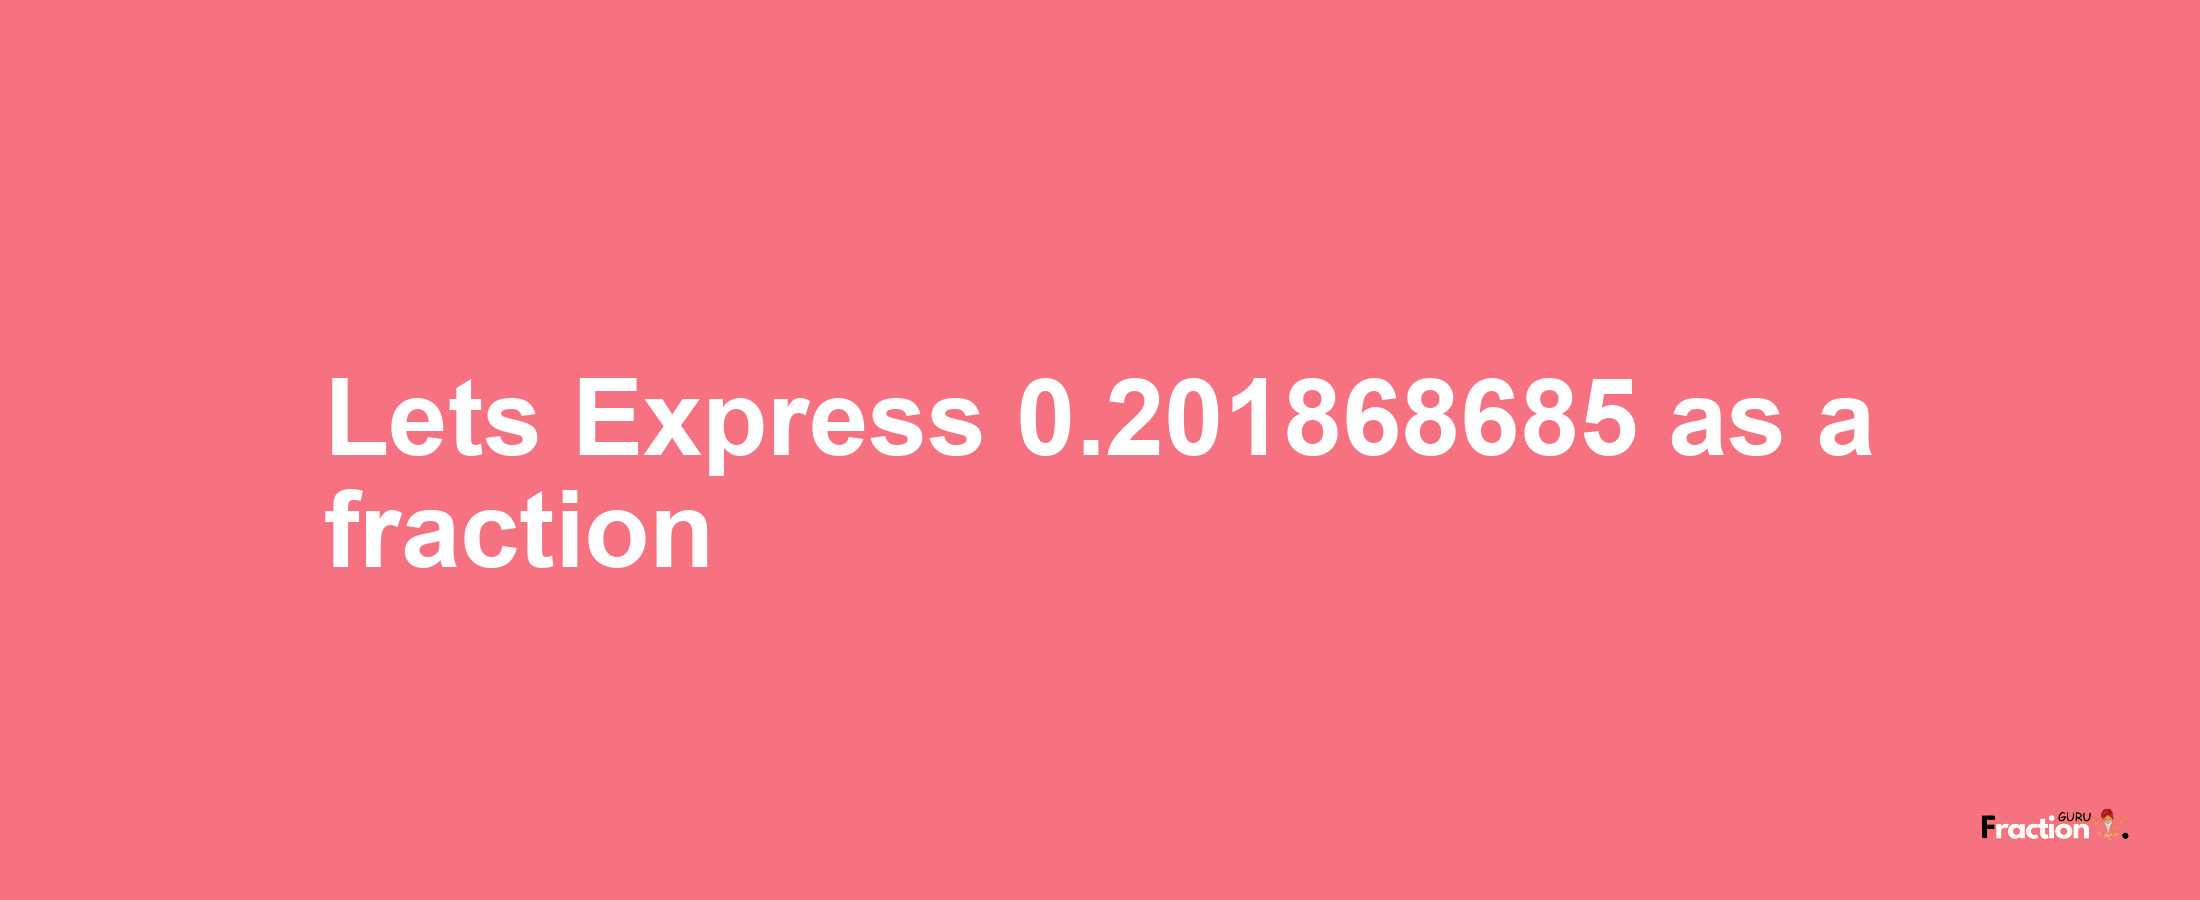 Lets Express 0.201868685 as afraction